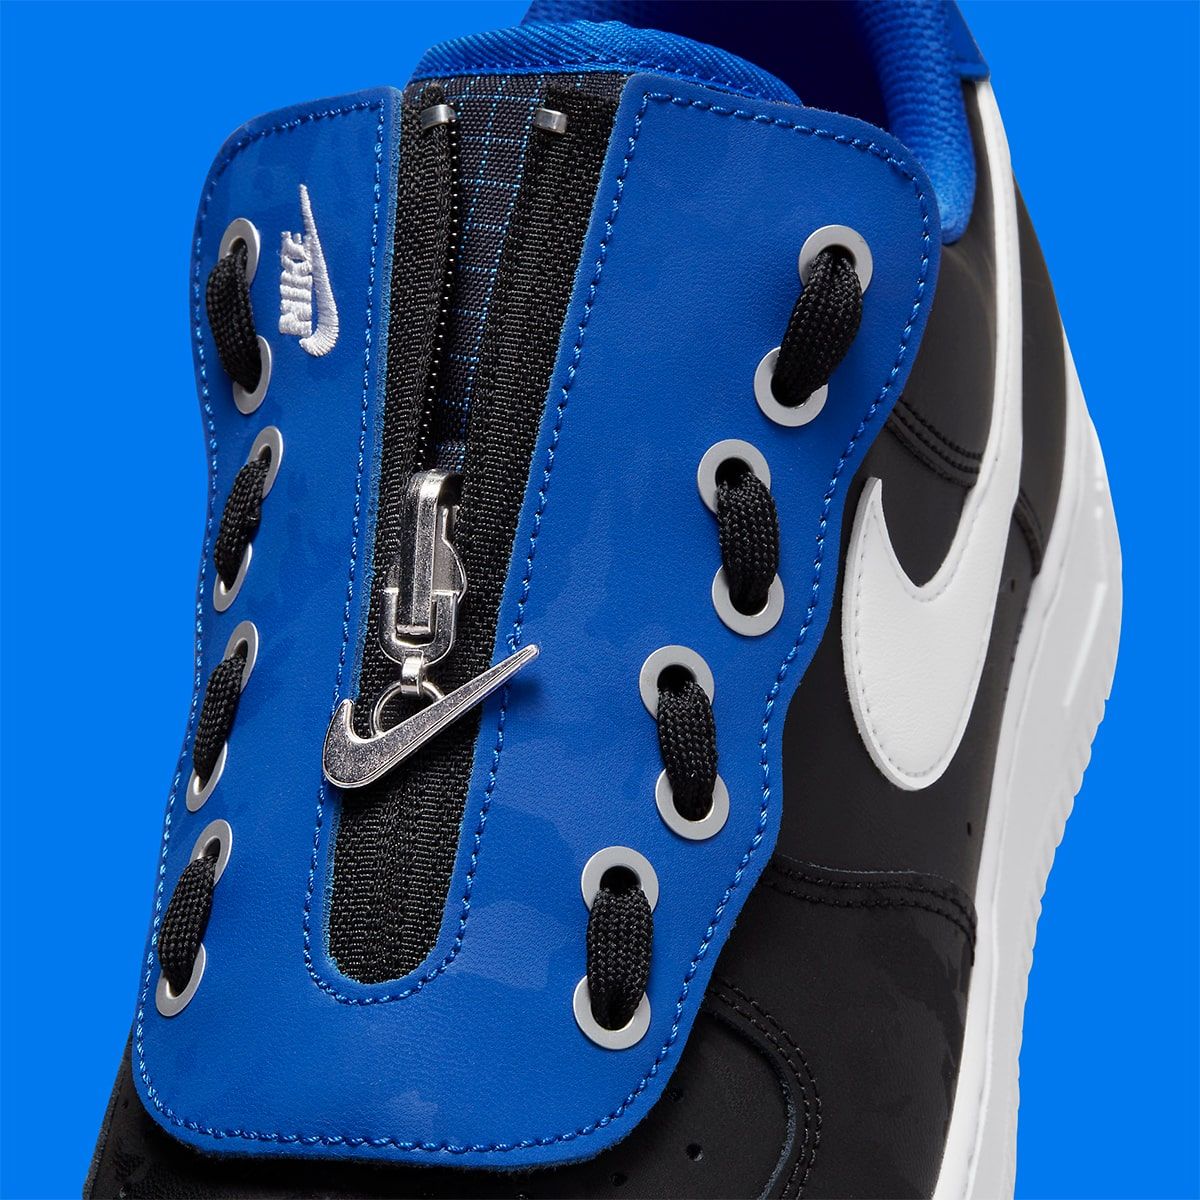 The Nike Air Force 1 Low “Shroud” Surfaces in Black and Royal